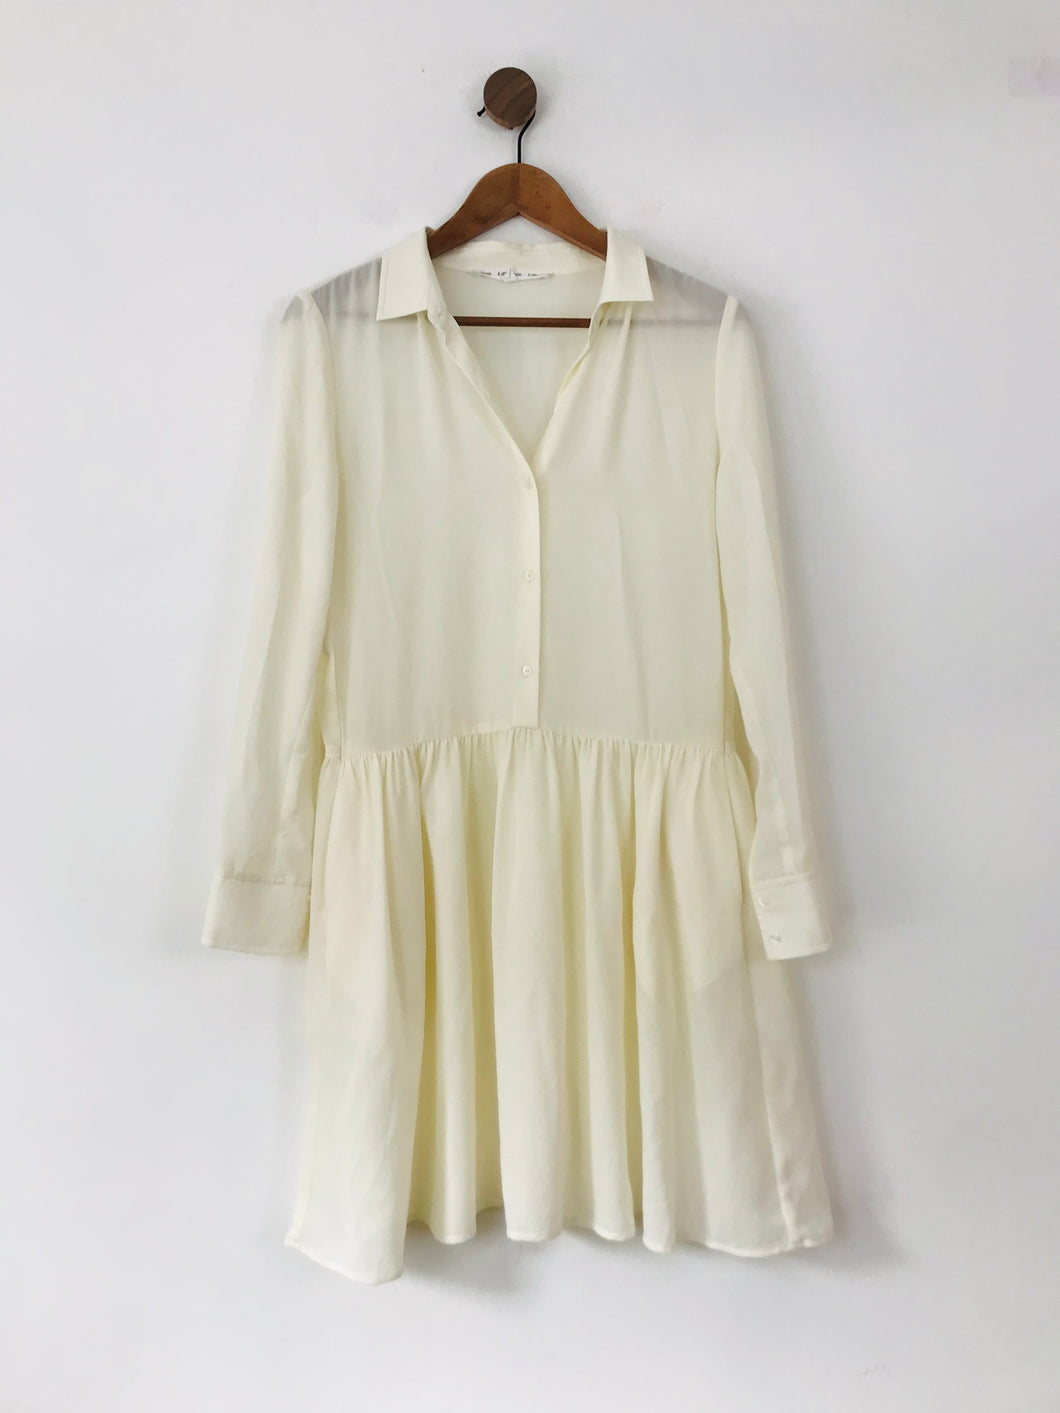 & Other Stories Women's Button Up Collared Shirt Dress | 38 UK12 | White